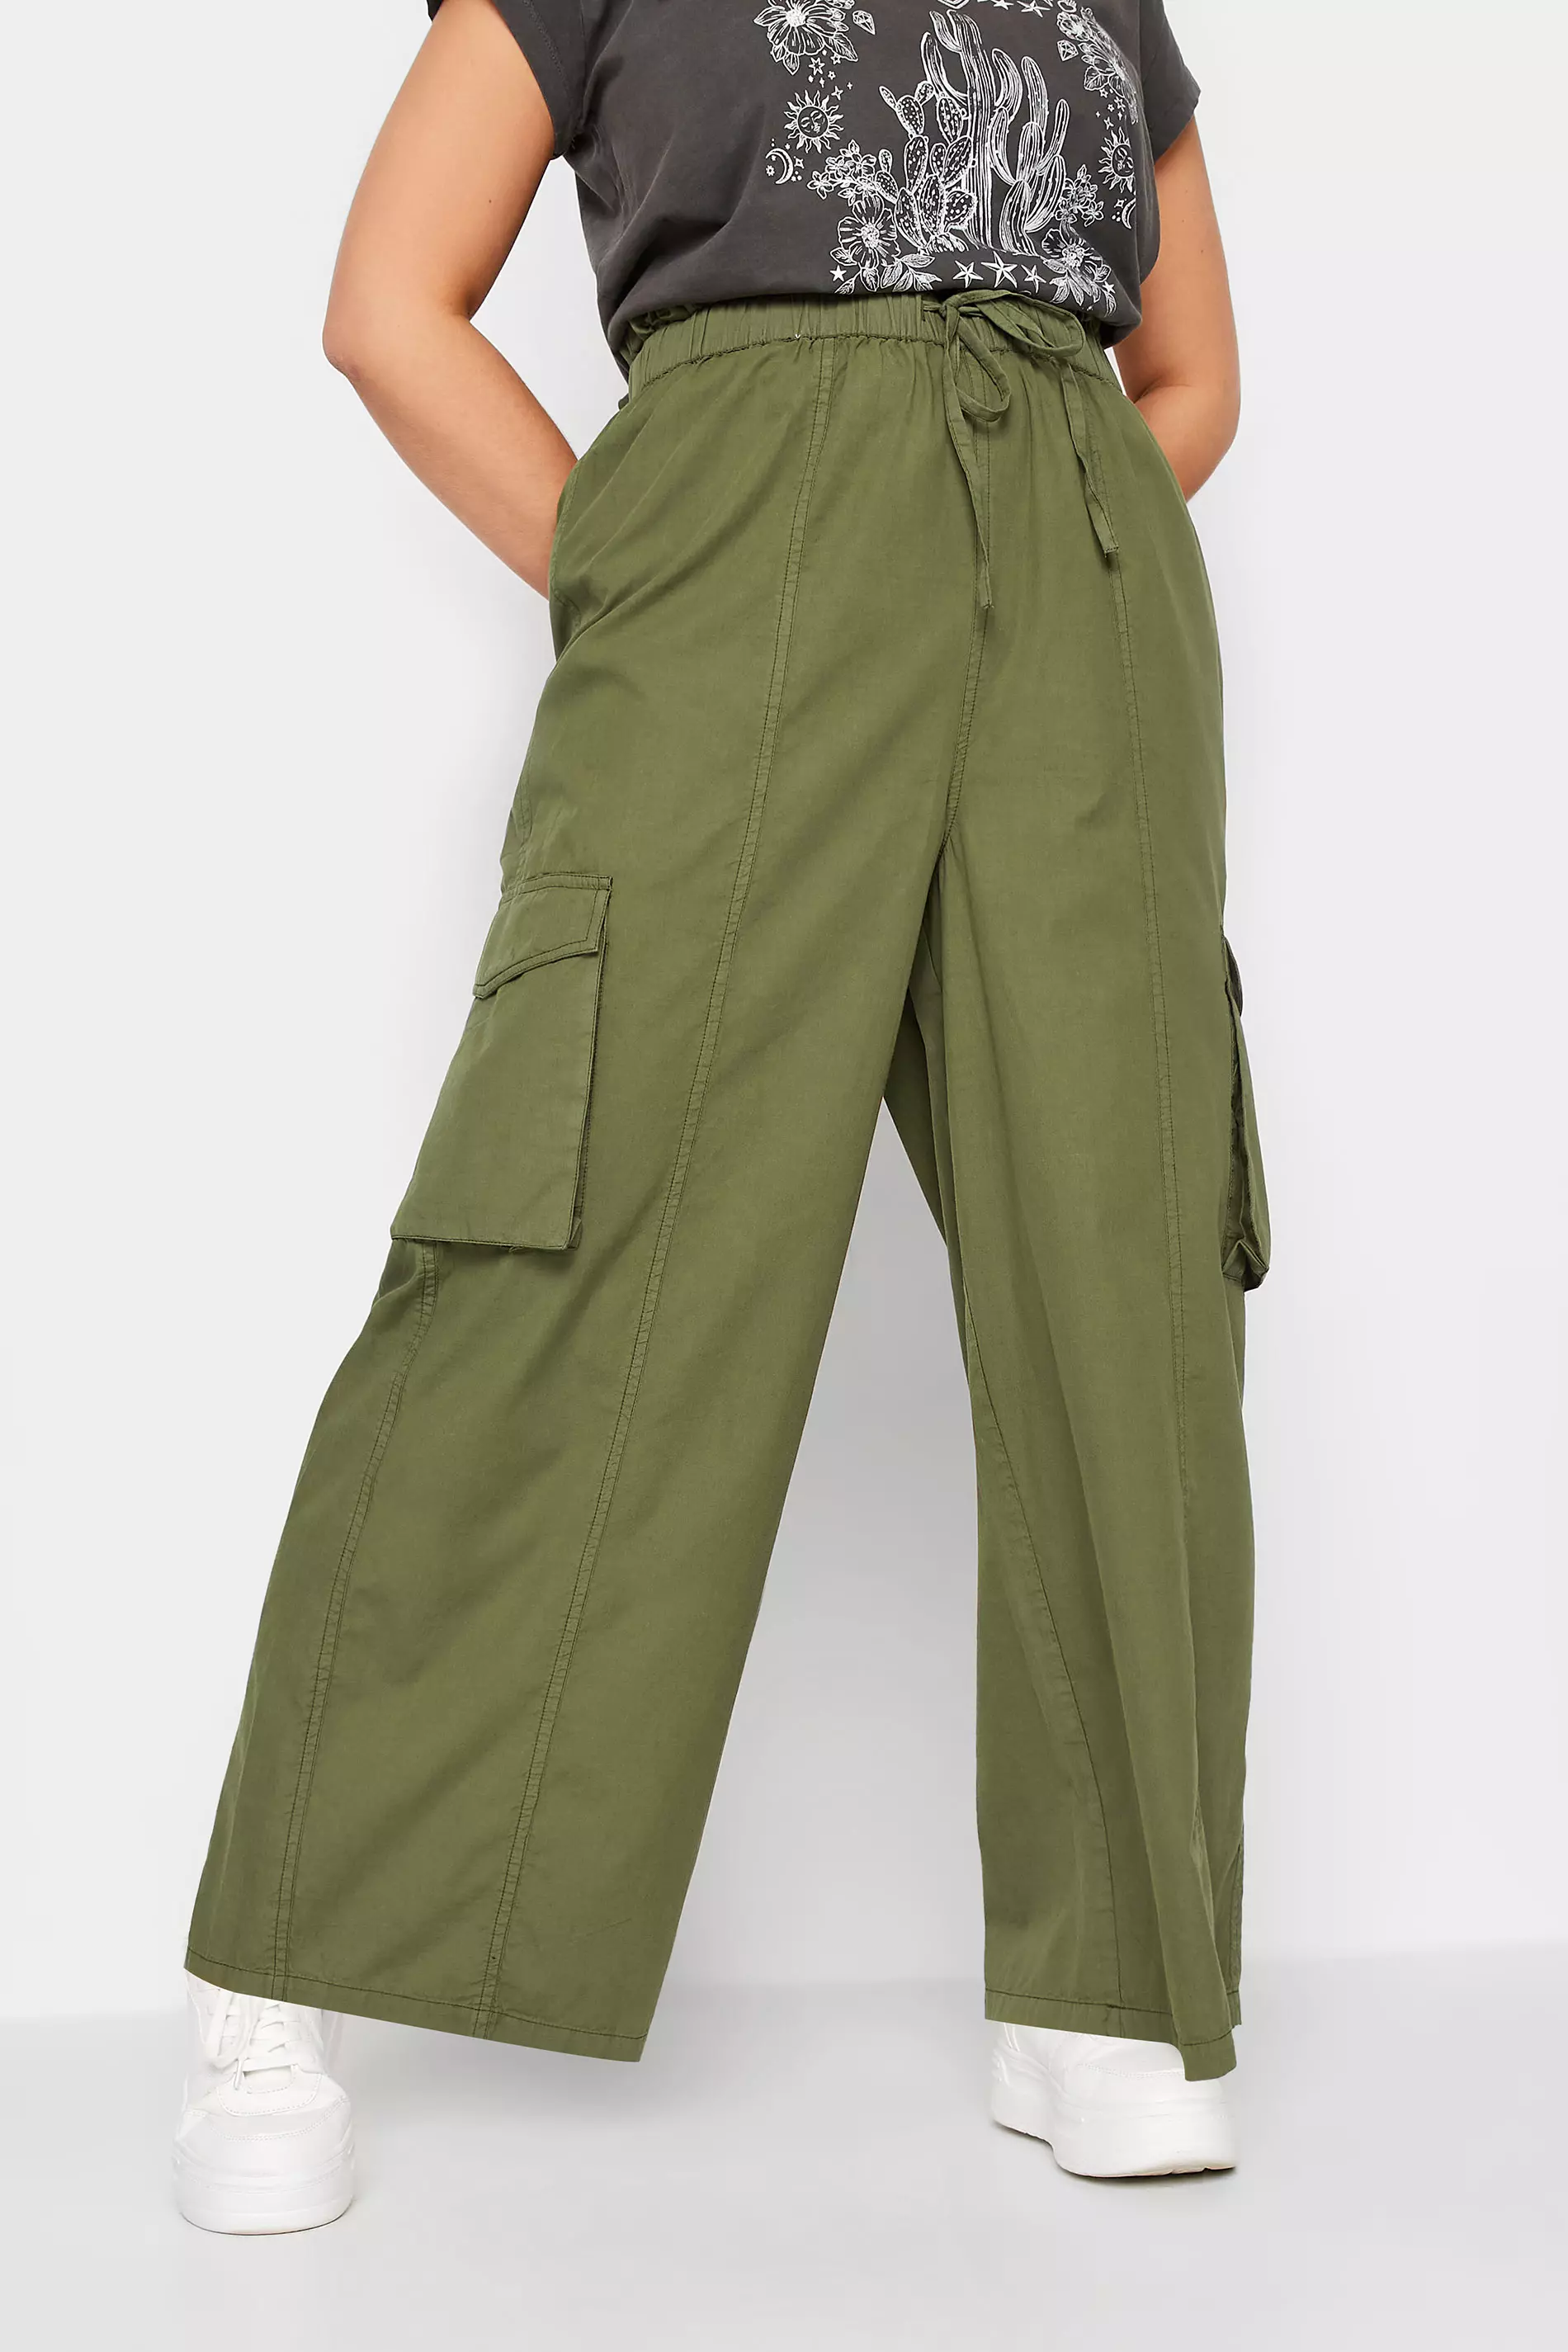 Pockets For Women - Limited Collection Curve Khaki Green Cargo